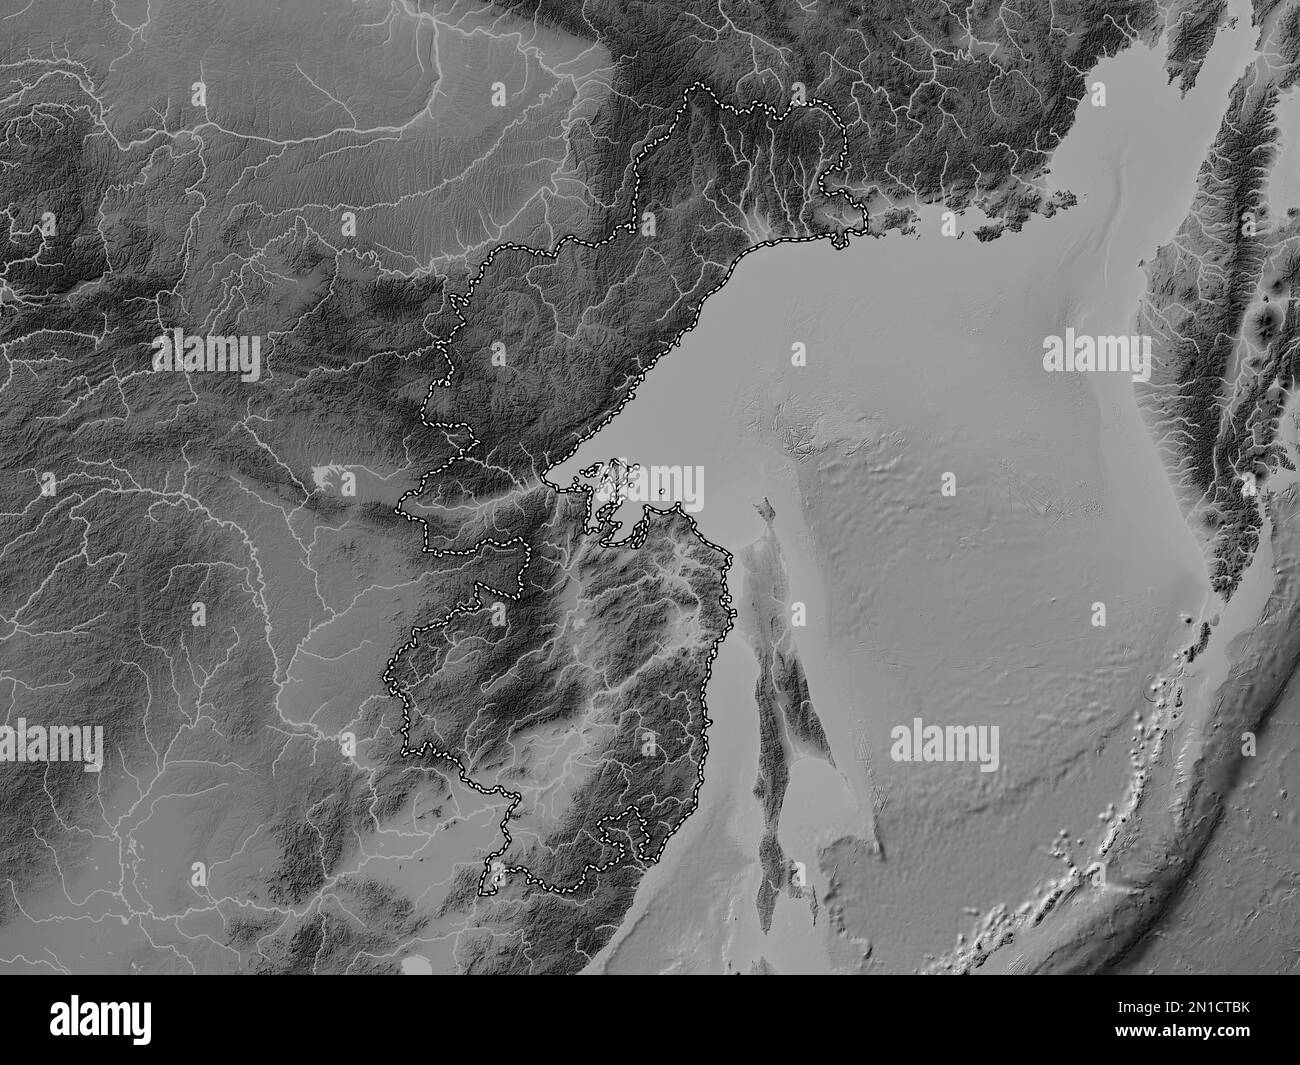 Khabarovsk, territory of Russia. Grayscale elevation map with lakes and rivers Stock Photo